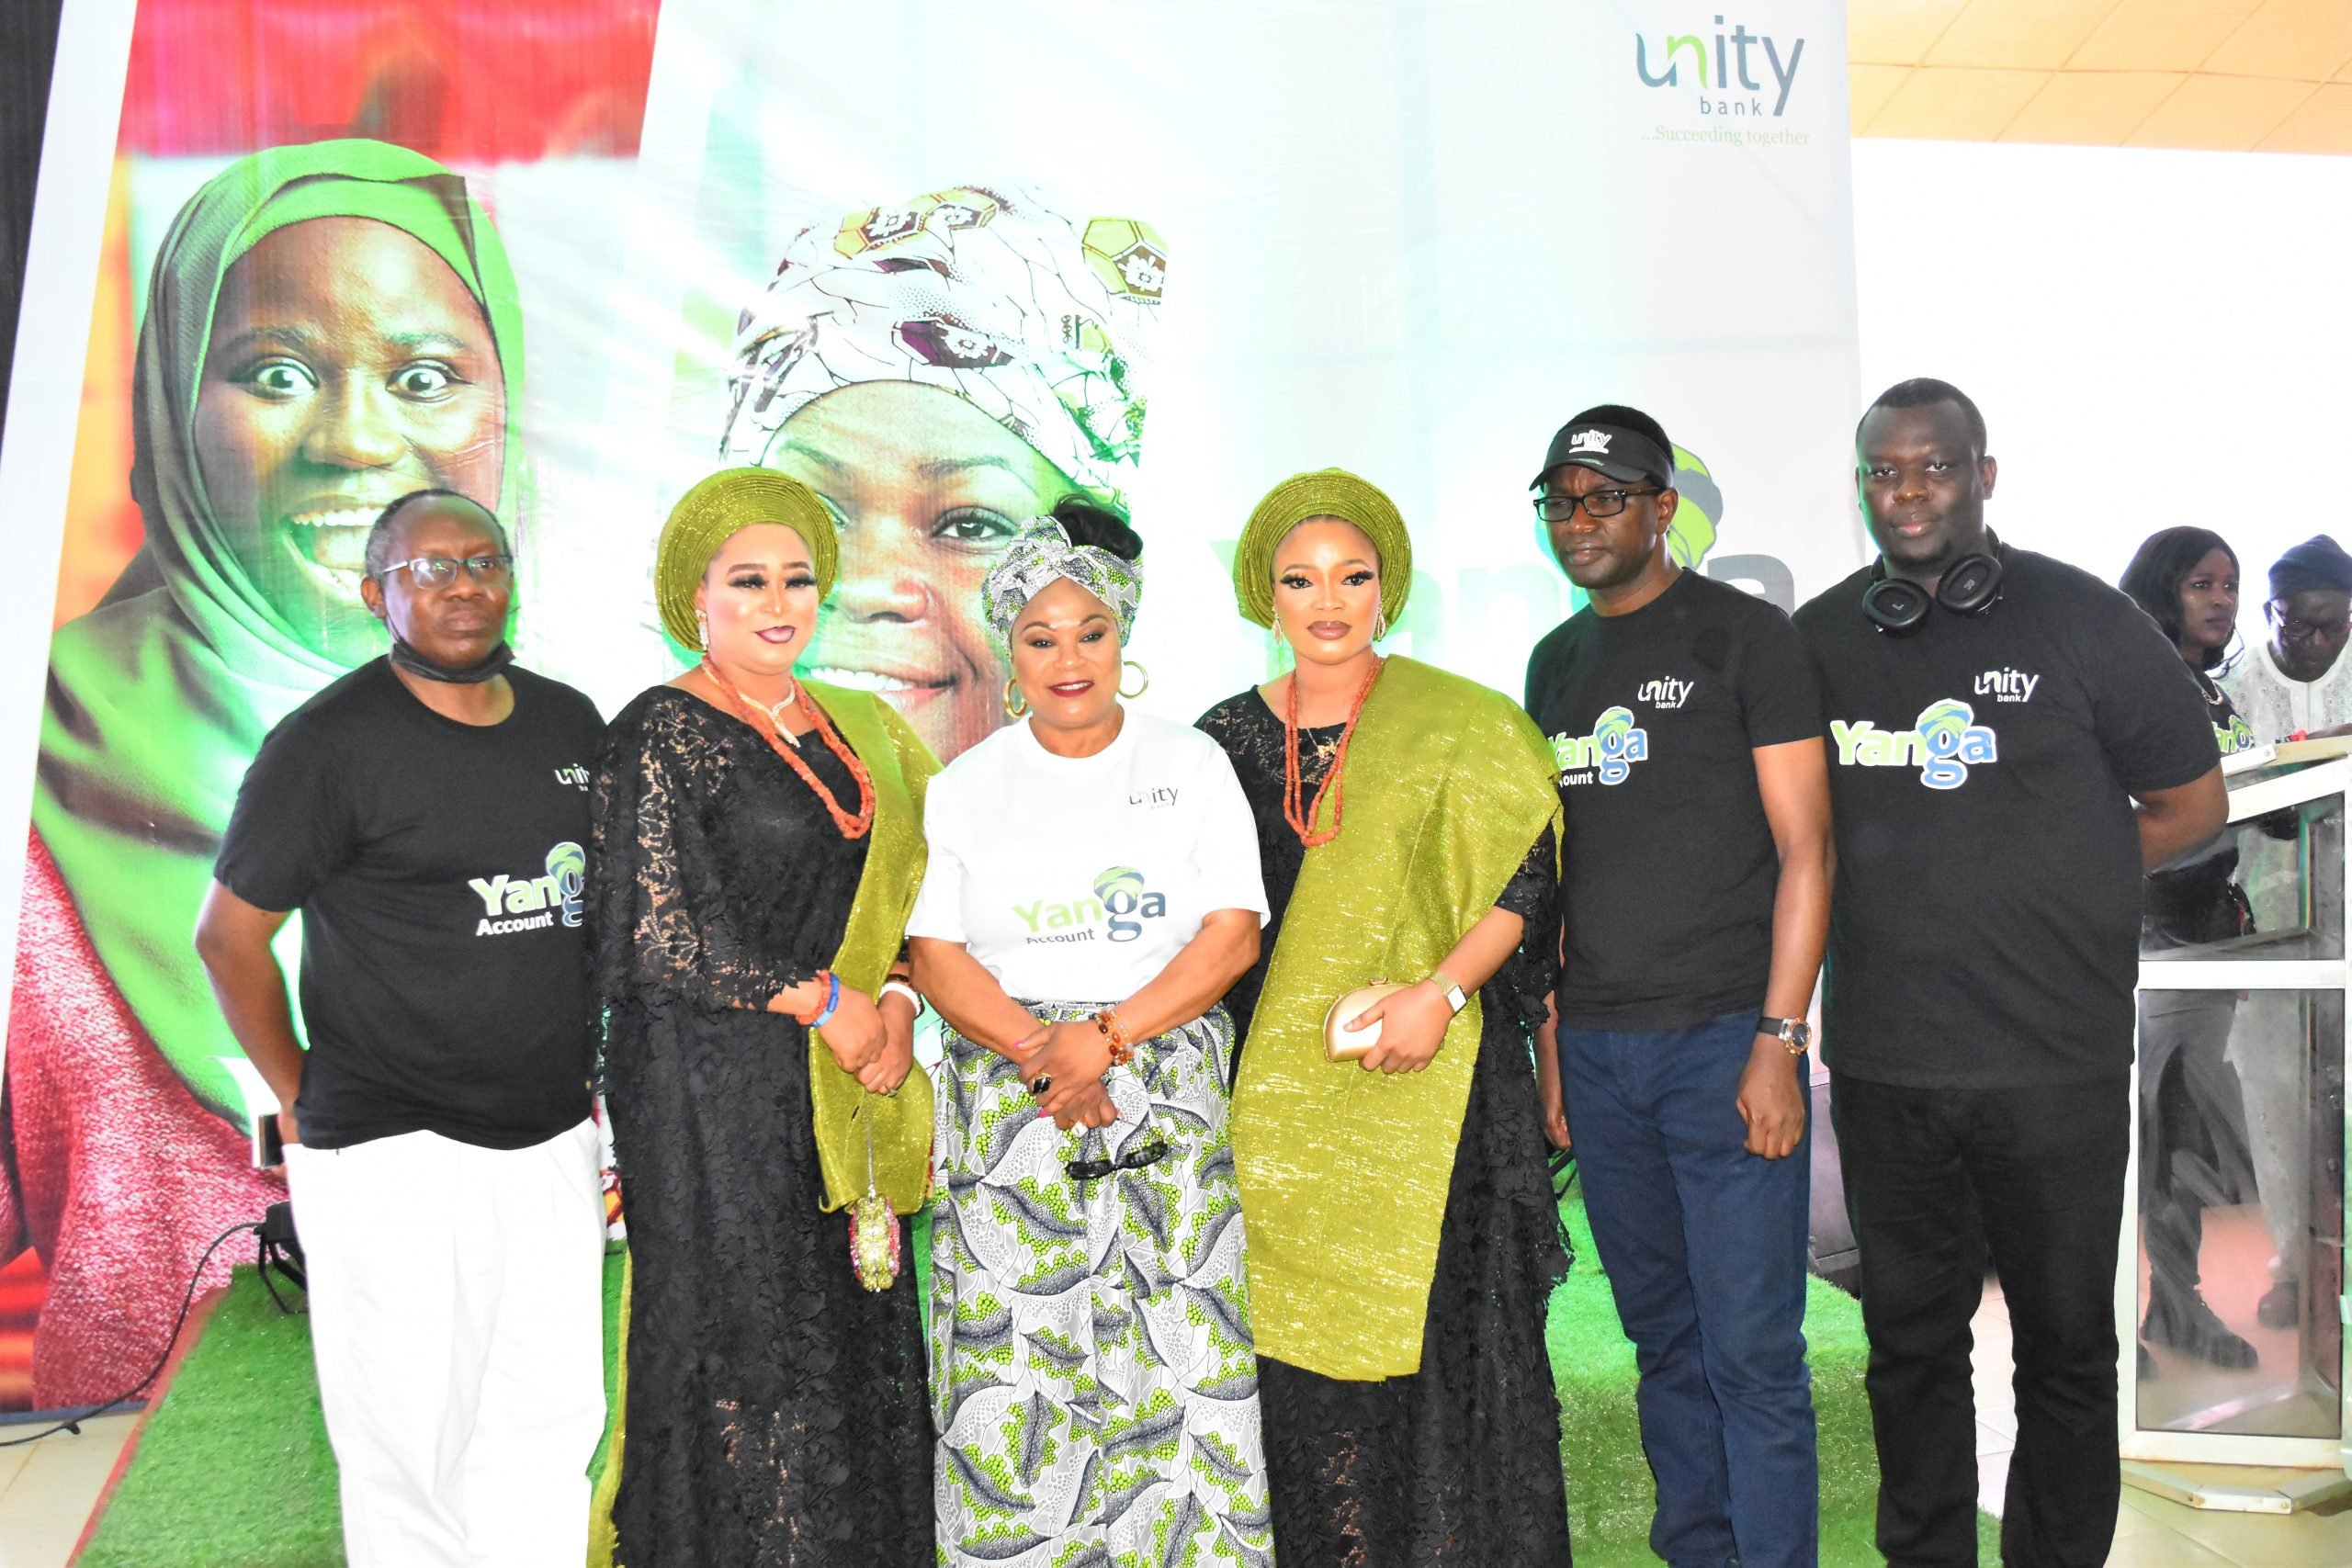 Unity Bank Collaborates Women Groups To Deepen Financial Inclusion With ‘Yanga Account’